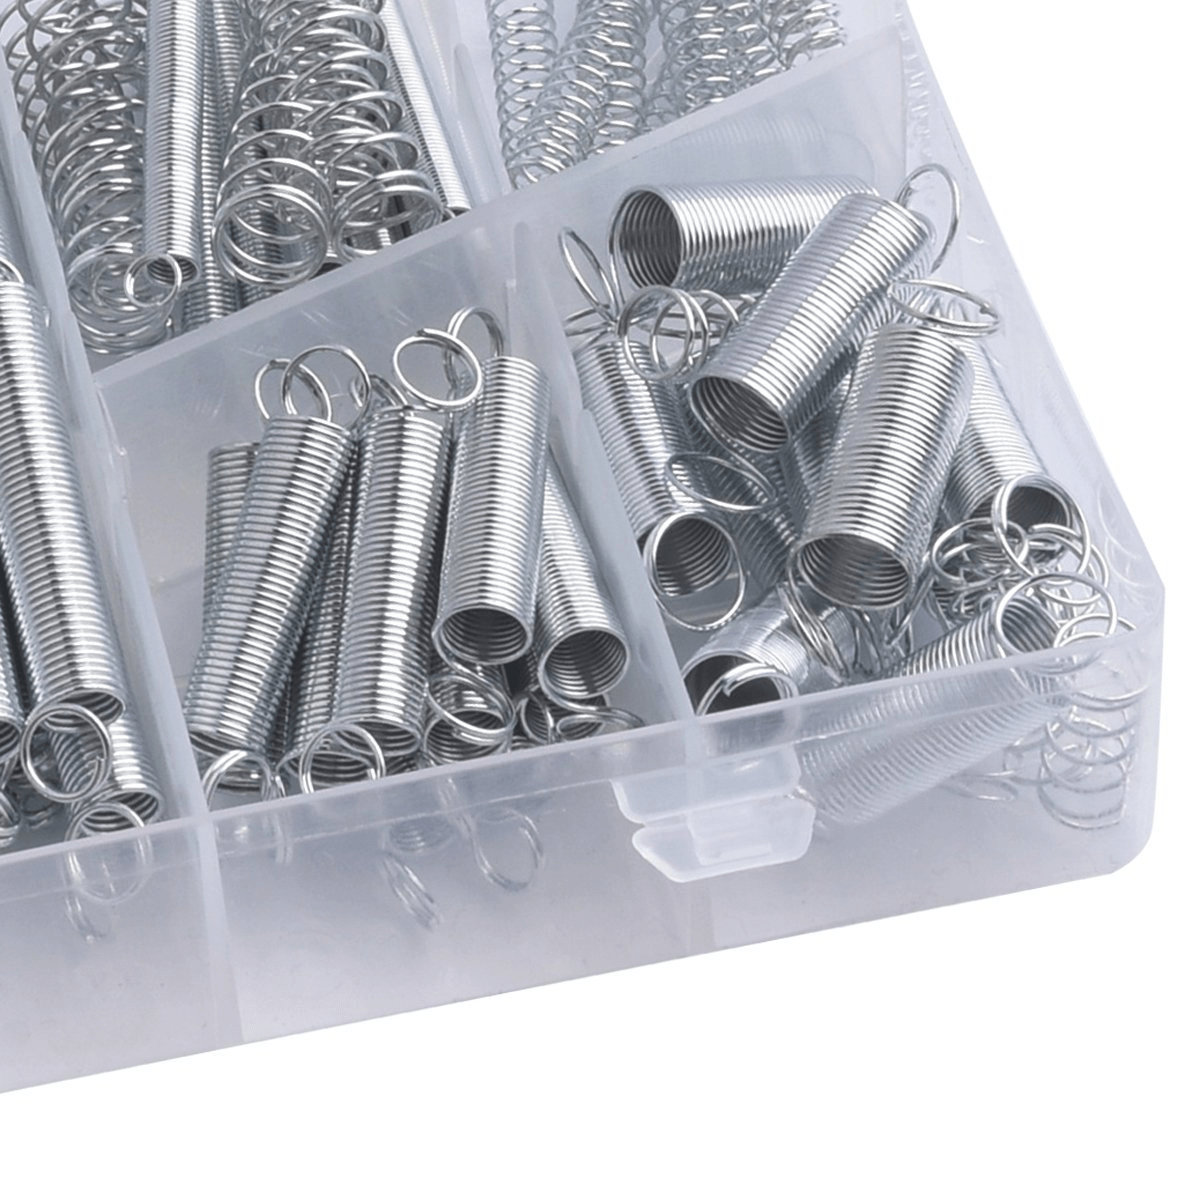 200-Piece Zinc-Plated Steel Spring Assortment Set - Electrical Hardware Compression & Extension Springs